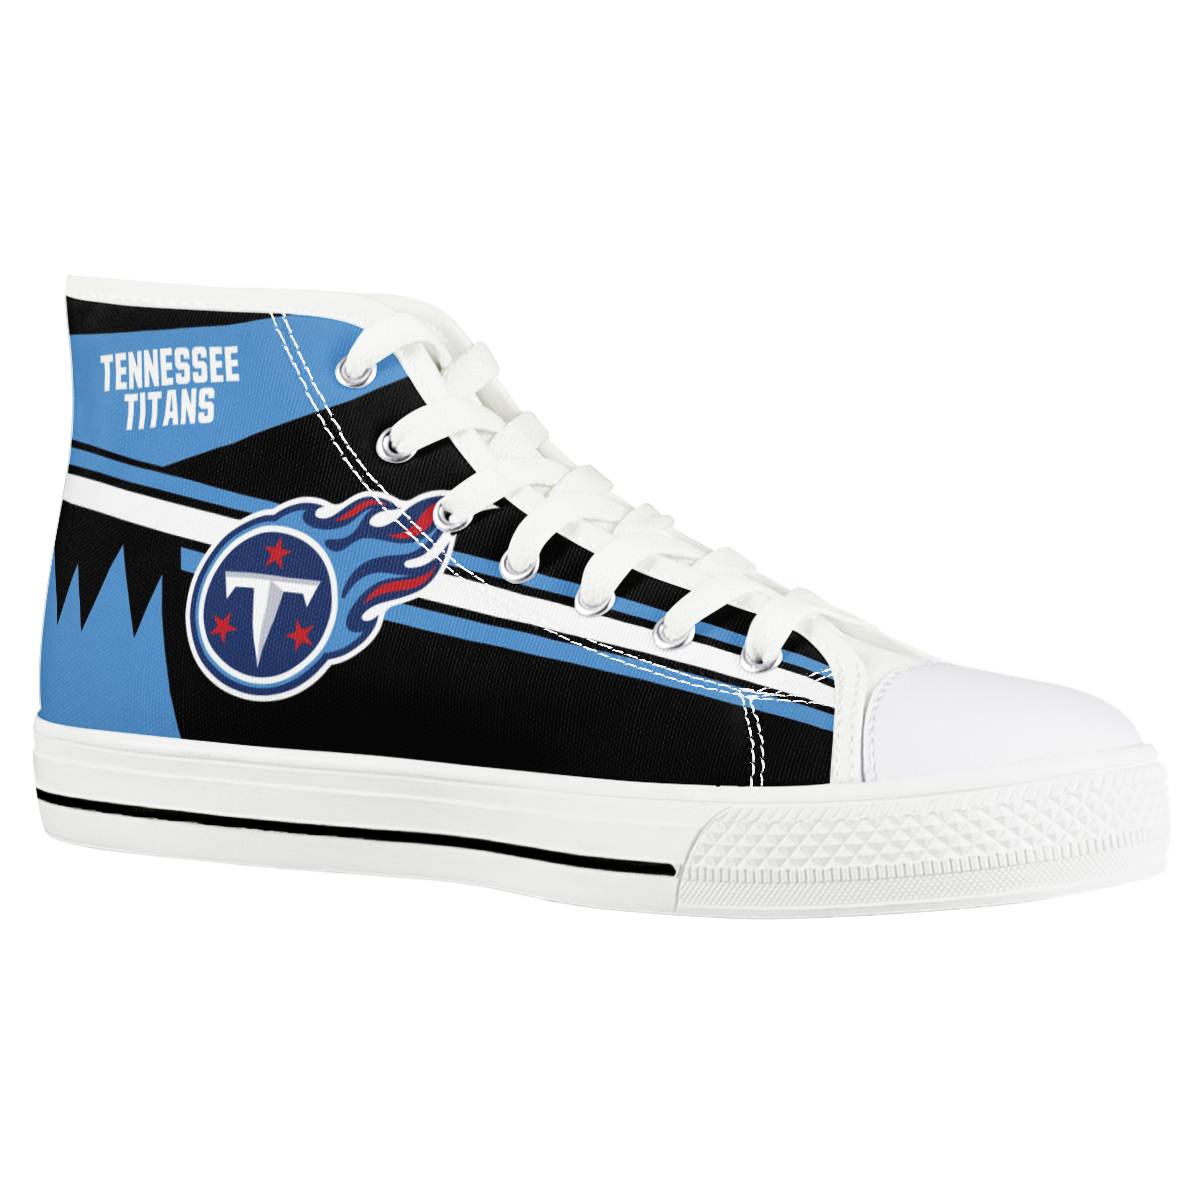 Women's Tennessee Titans High Top Canvas Sneakers 001